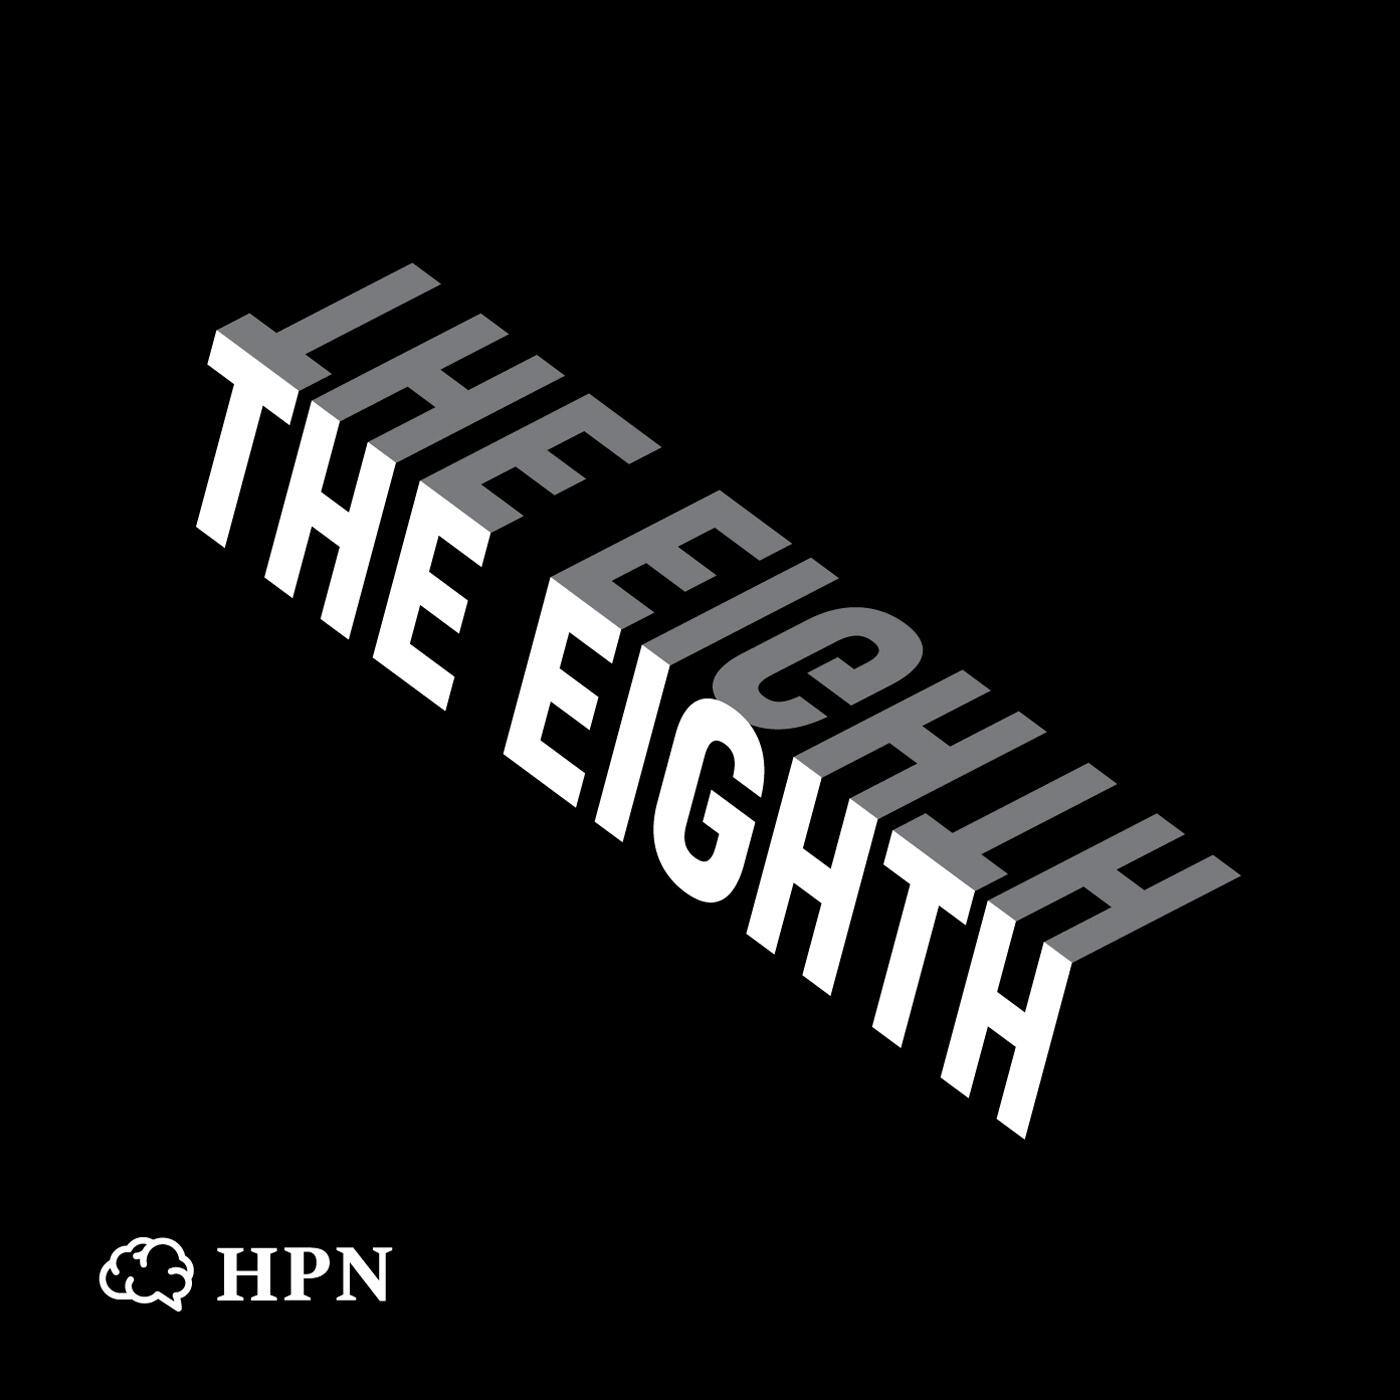 1: The Eighth Trailer